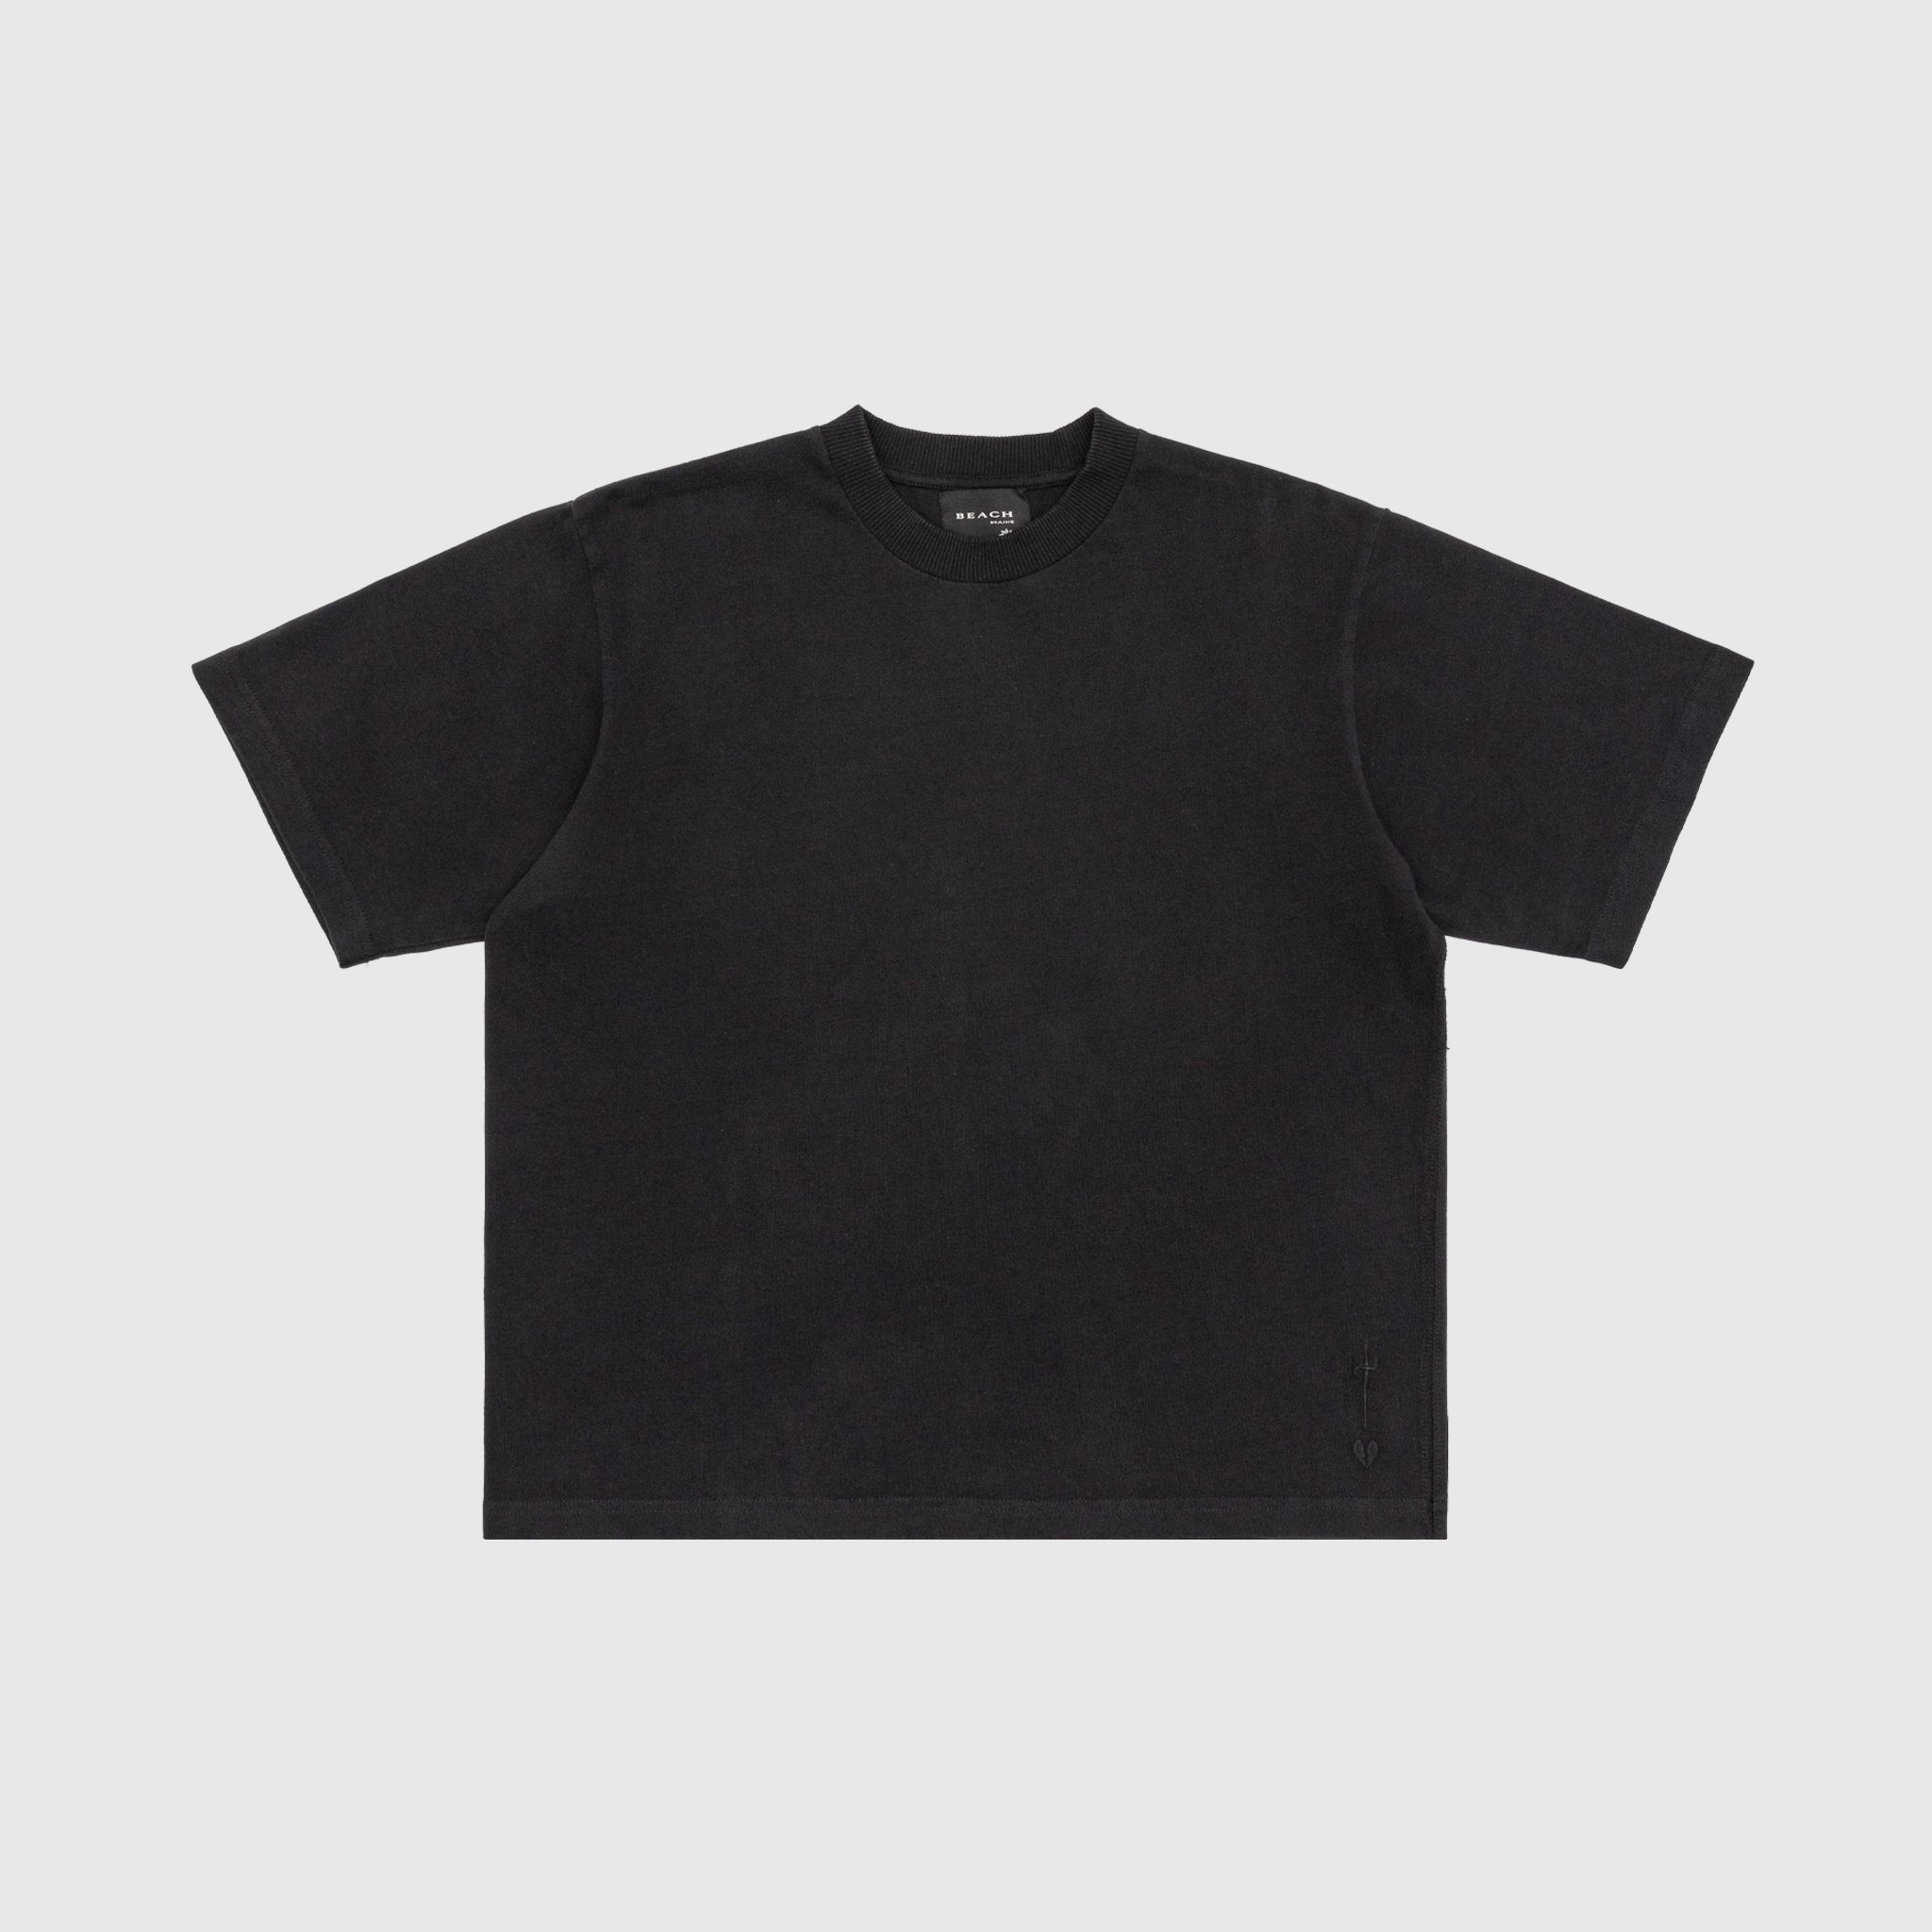 BOXY SHOES – S/S PACKER T-SHIRT